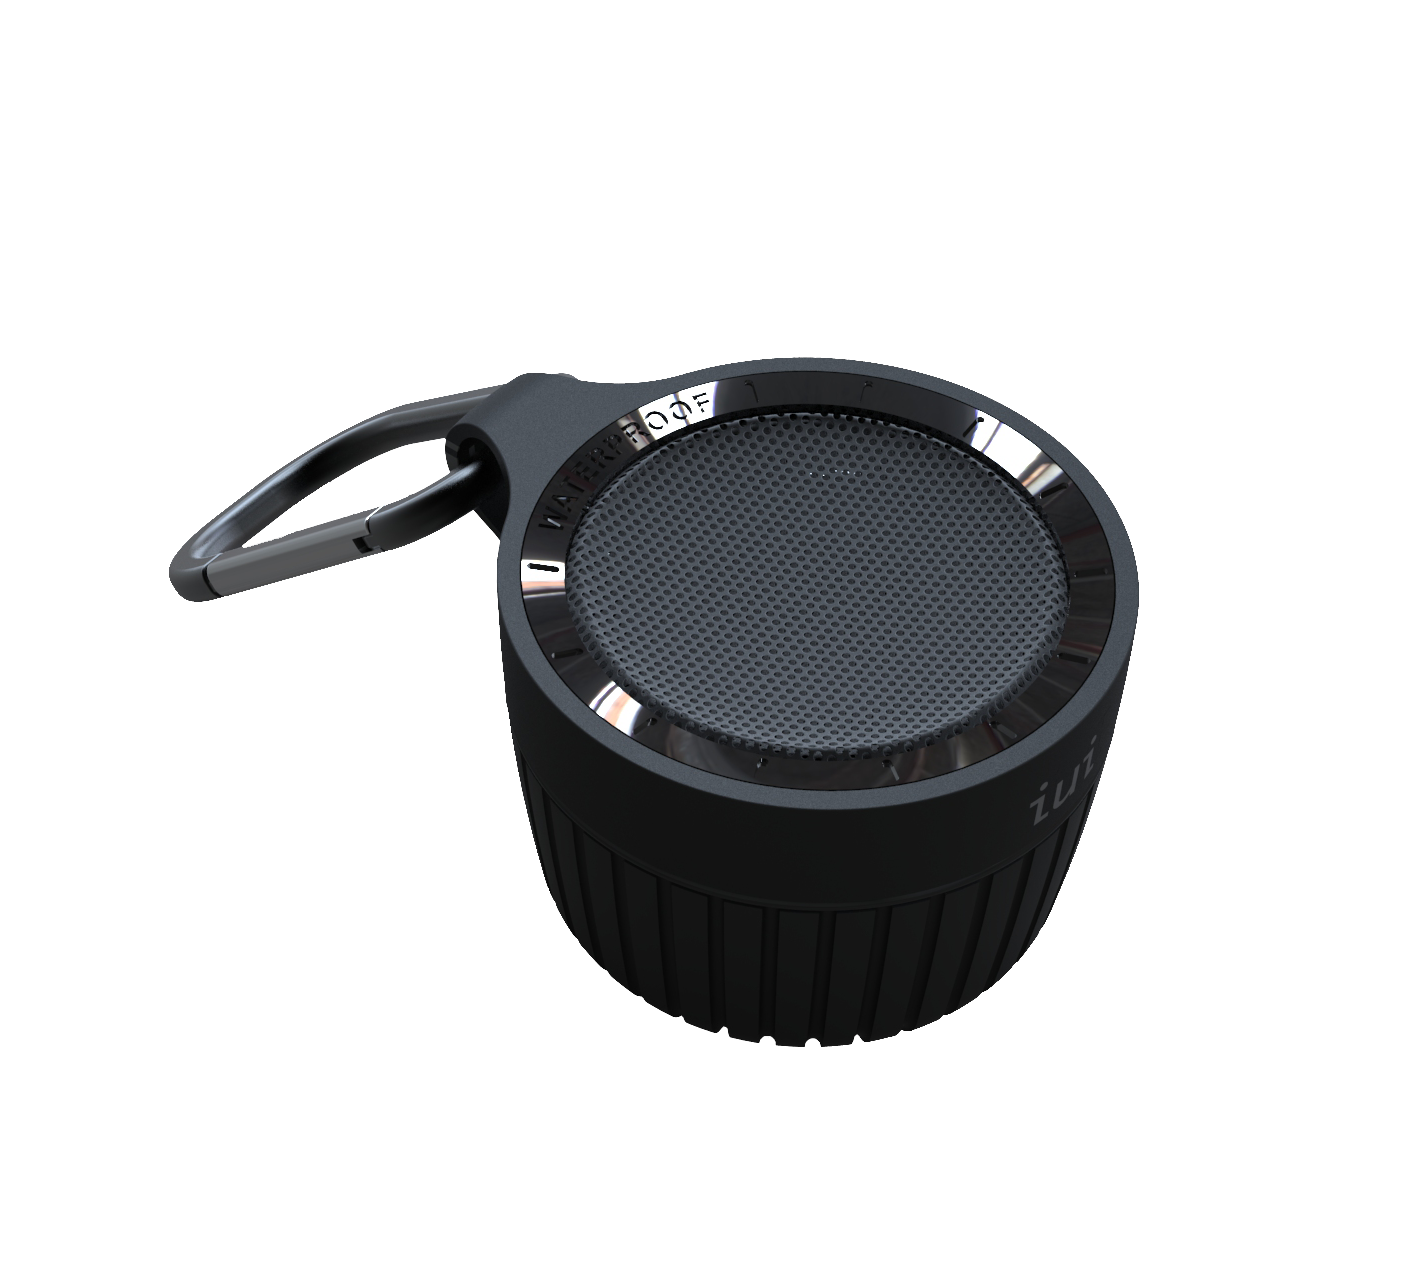 IUI Design is Launching the Bass Jumper Water Resistant Speaker at CES 2014